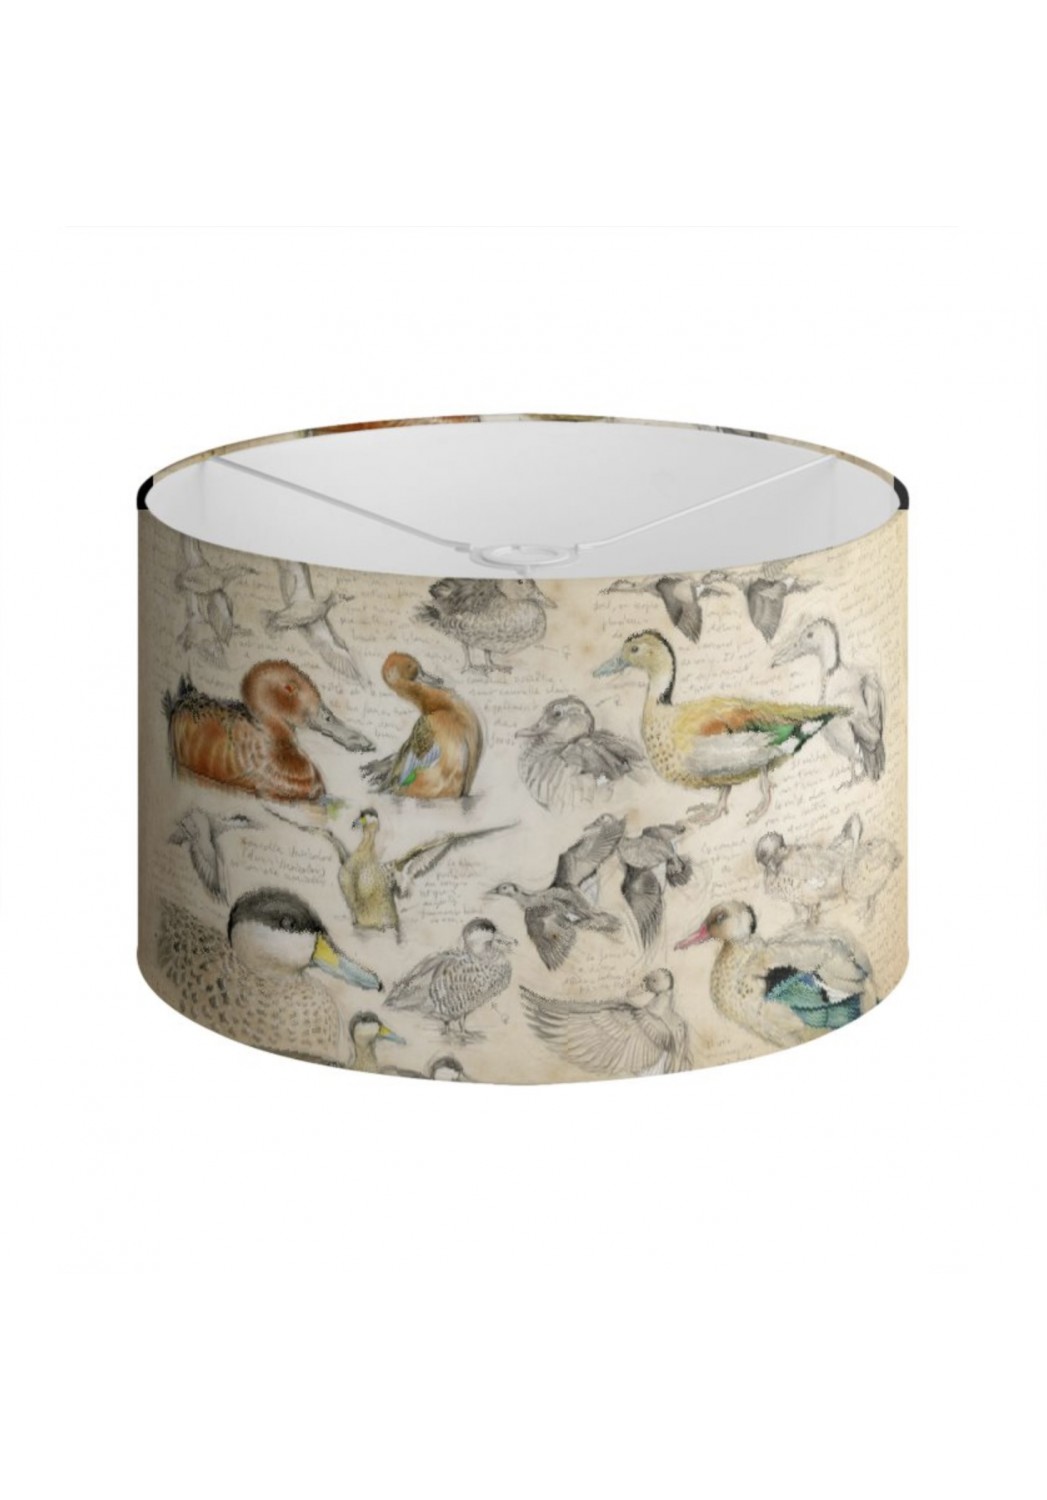 Marcello-art: Decoration accessoiries Lampshade 239 Teal